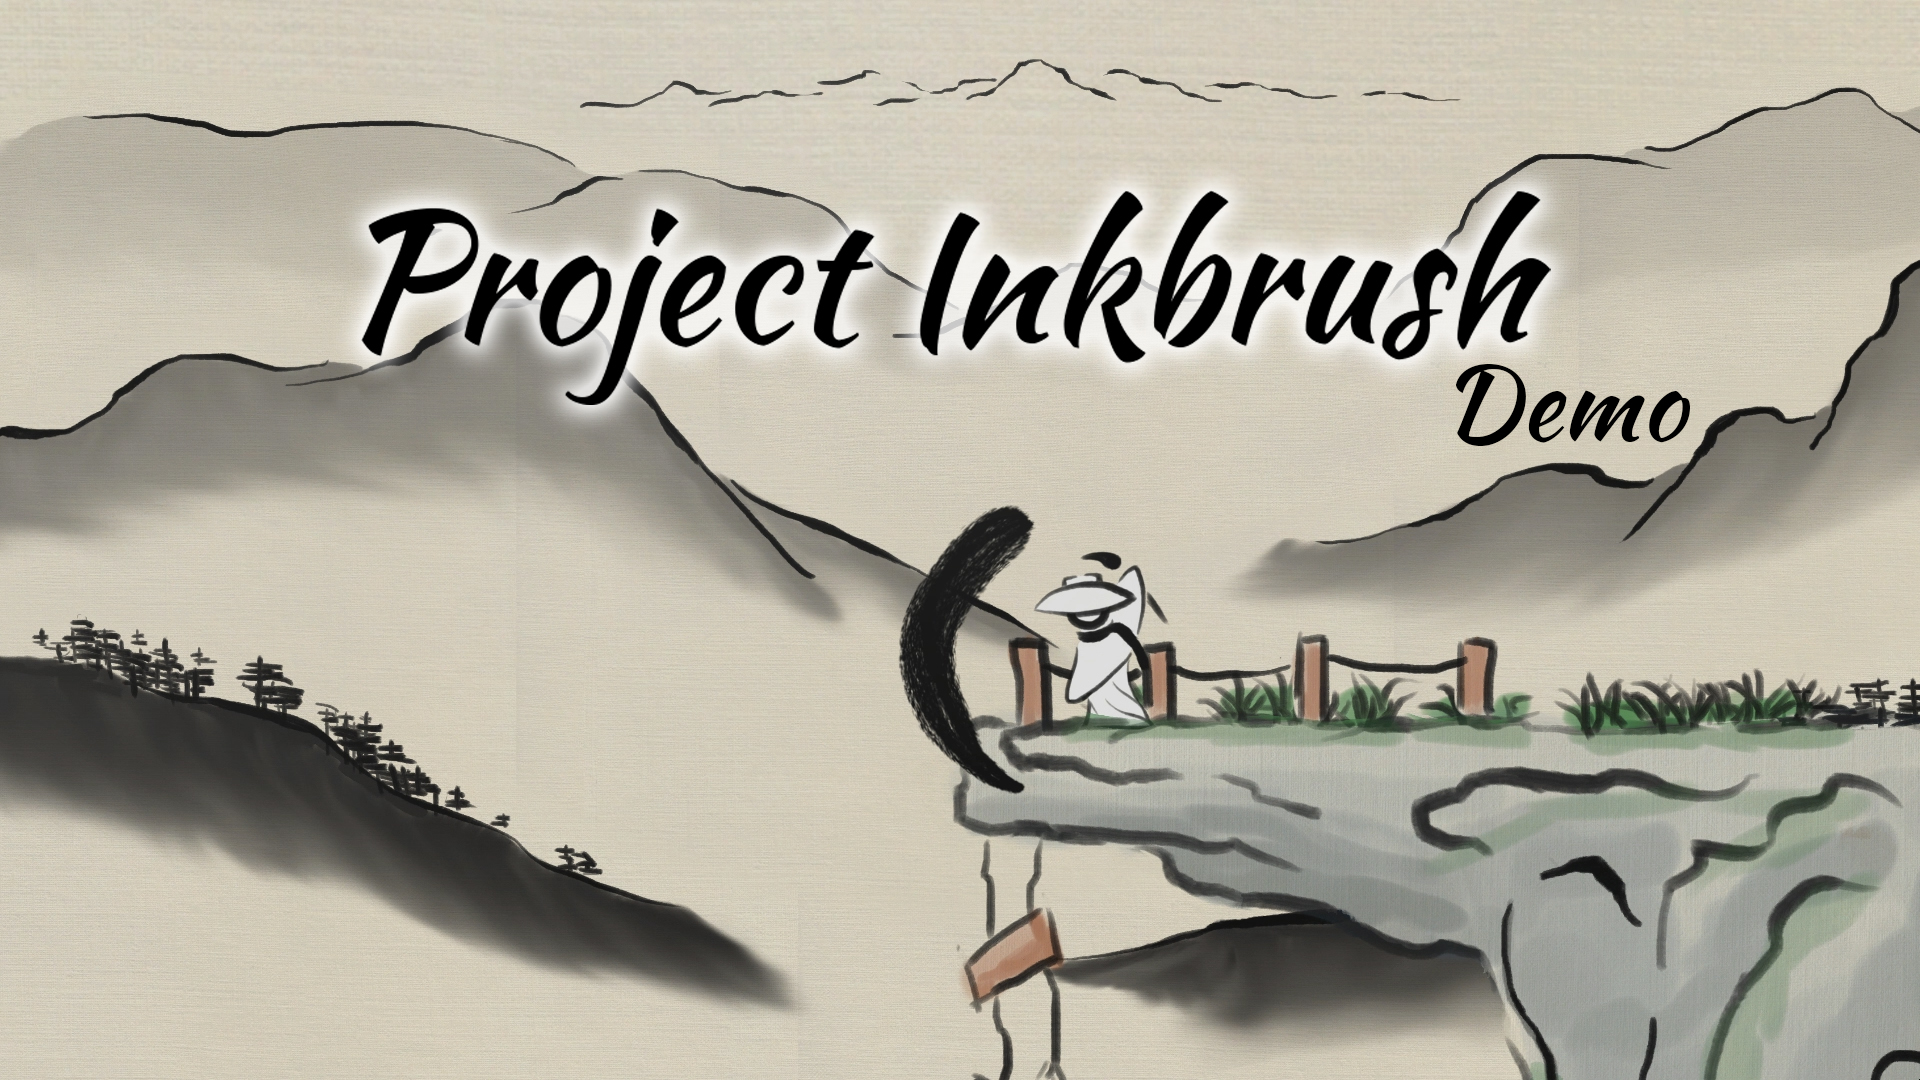 Project Inkbrush